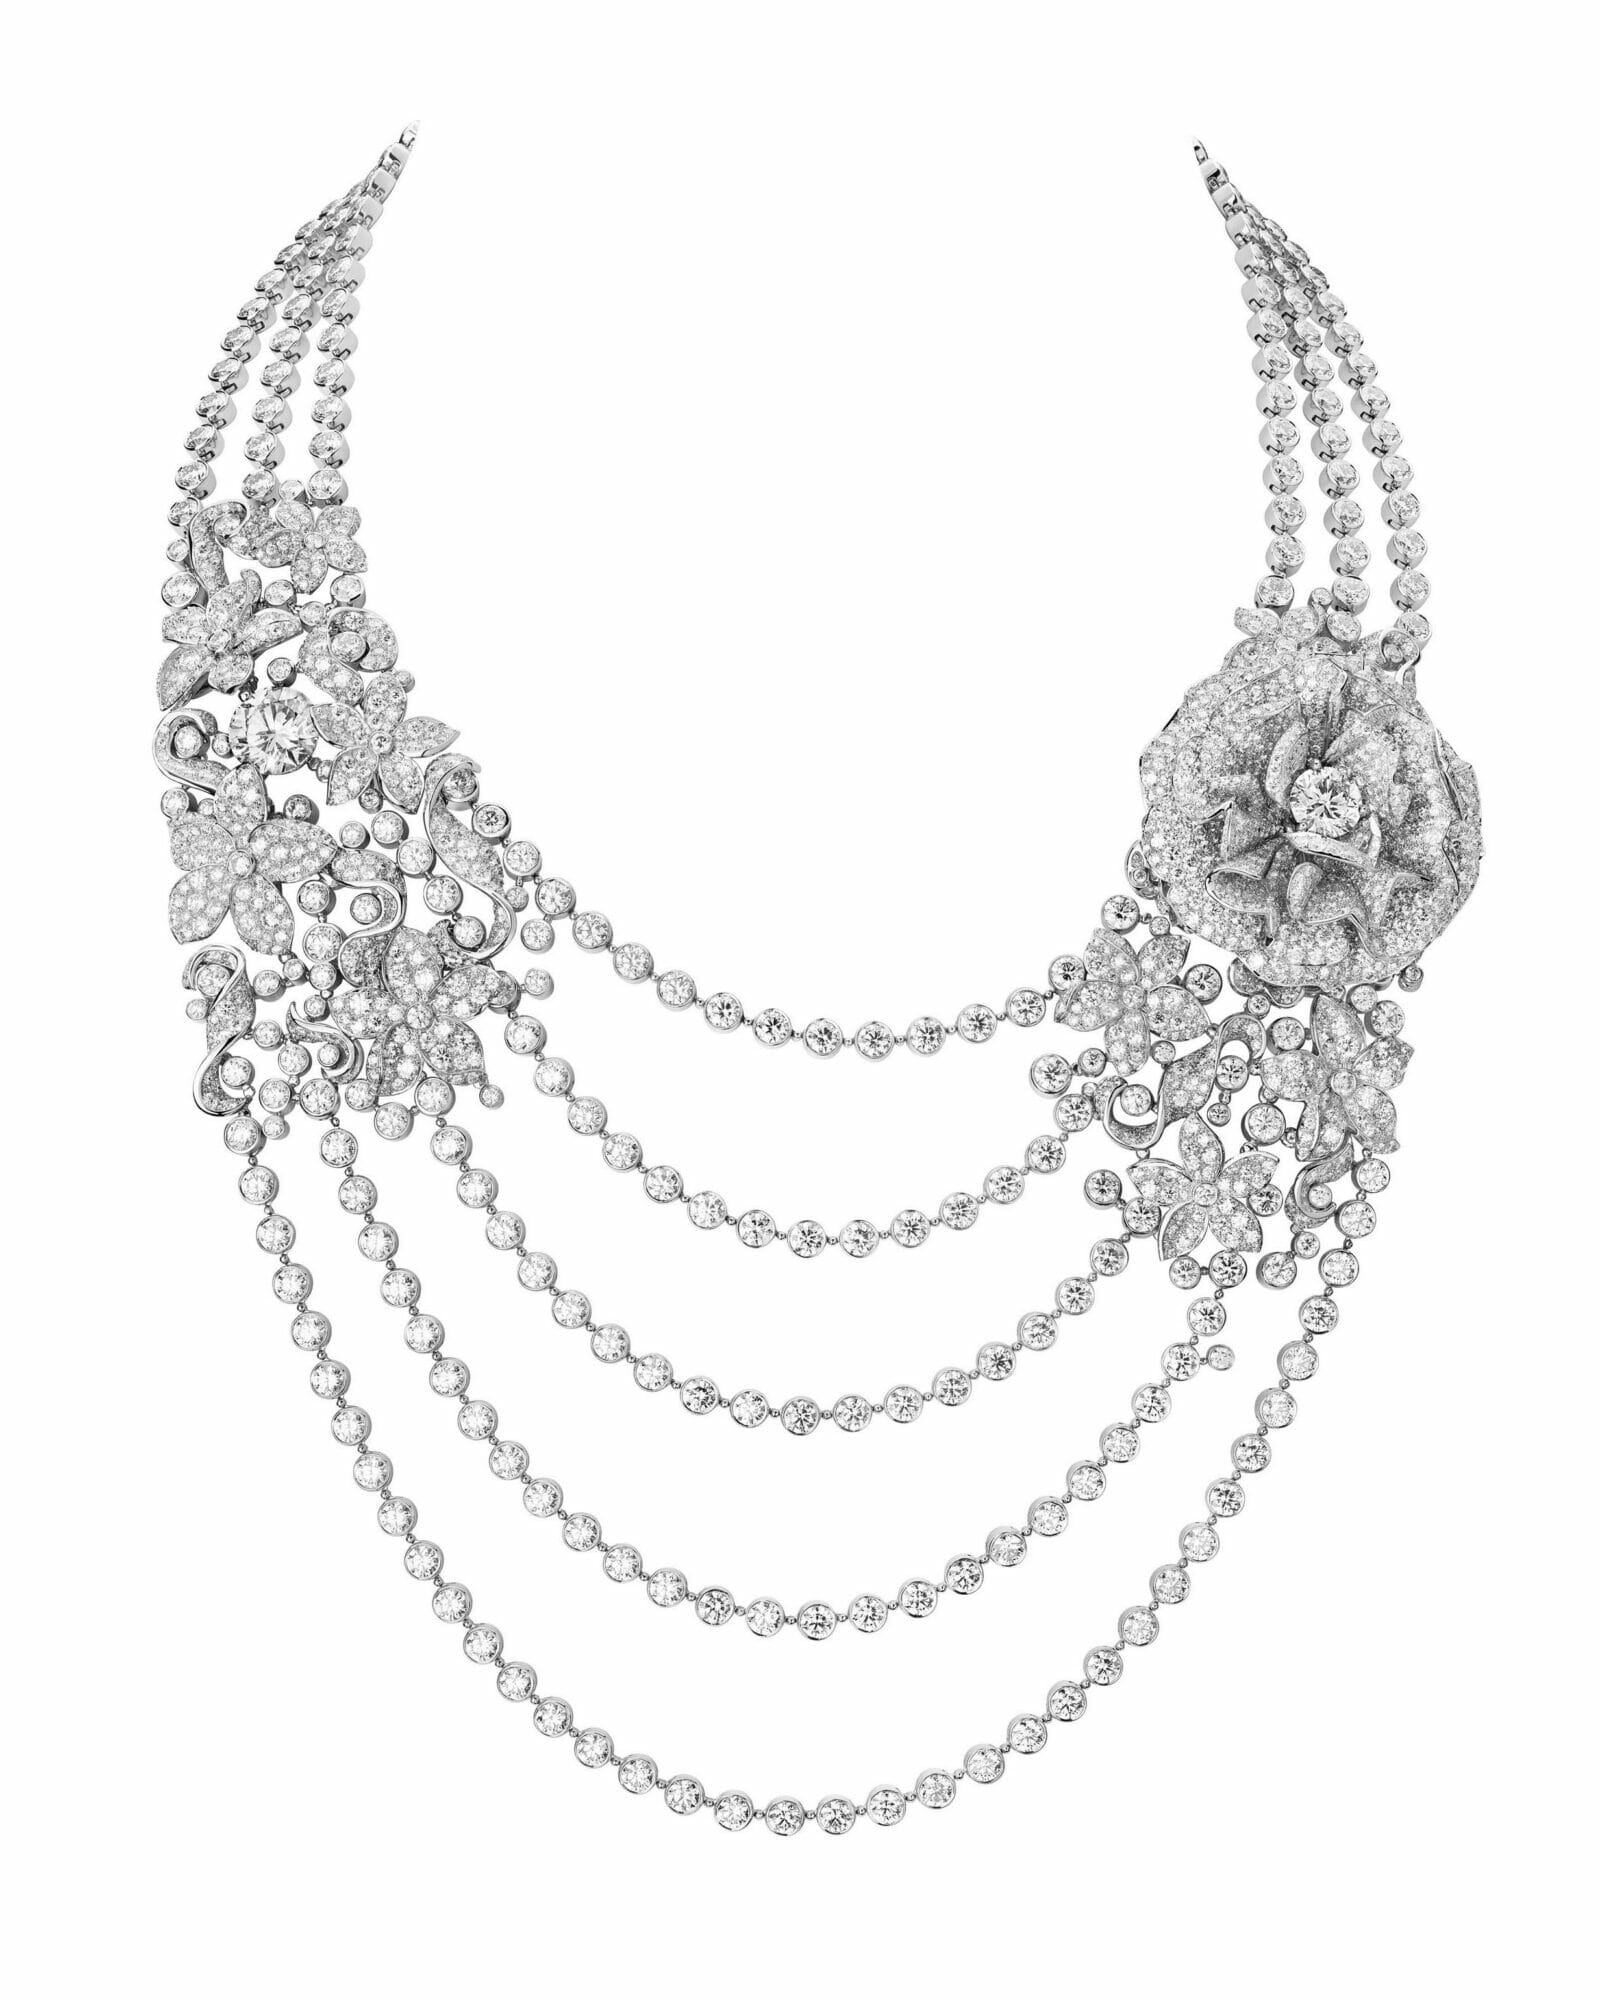 Chanel Celebrates 100 Years of N°5 with High Jewelry Collection